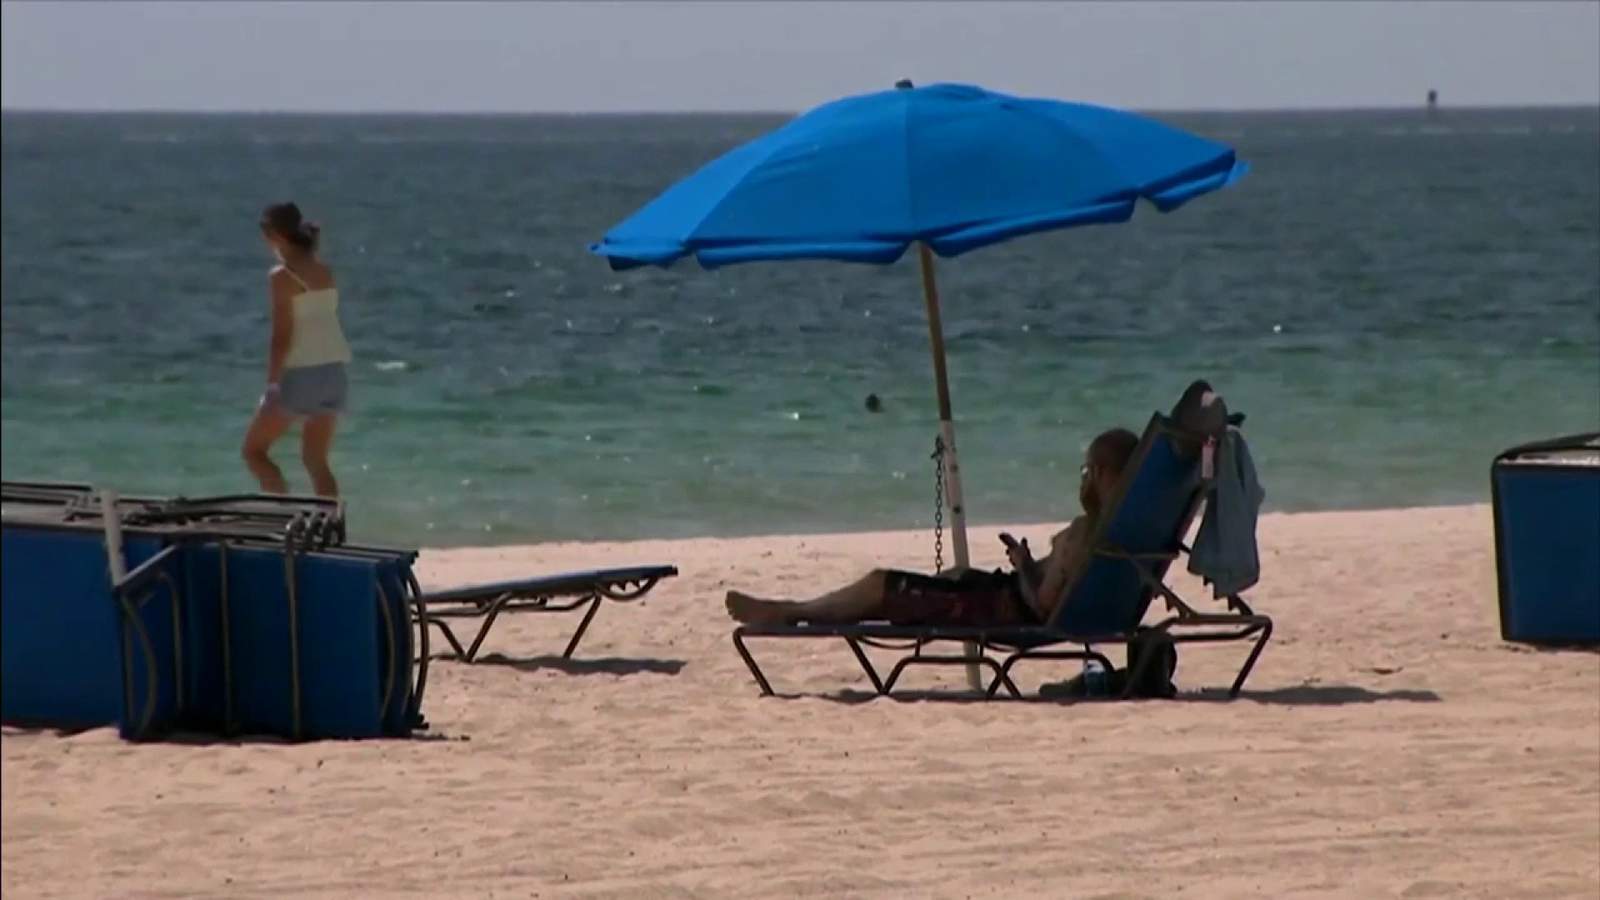 Ahead of Labor Day Celebrations, experts say: play it safe